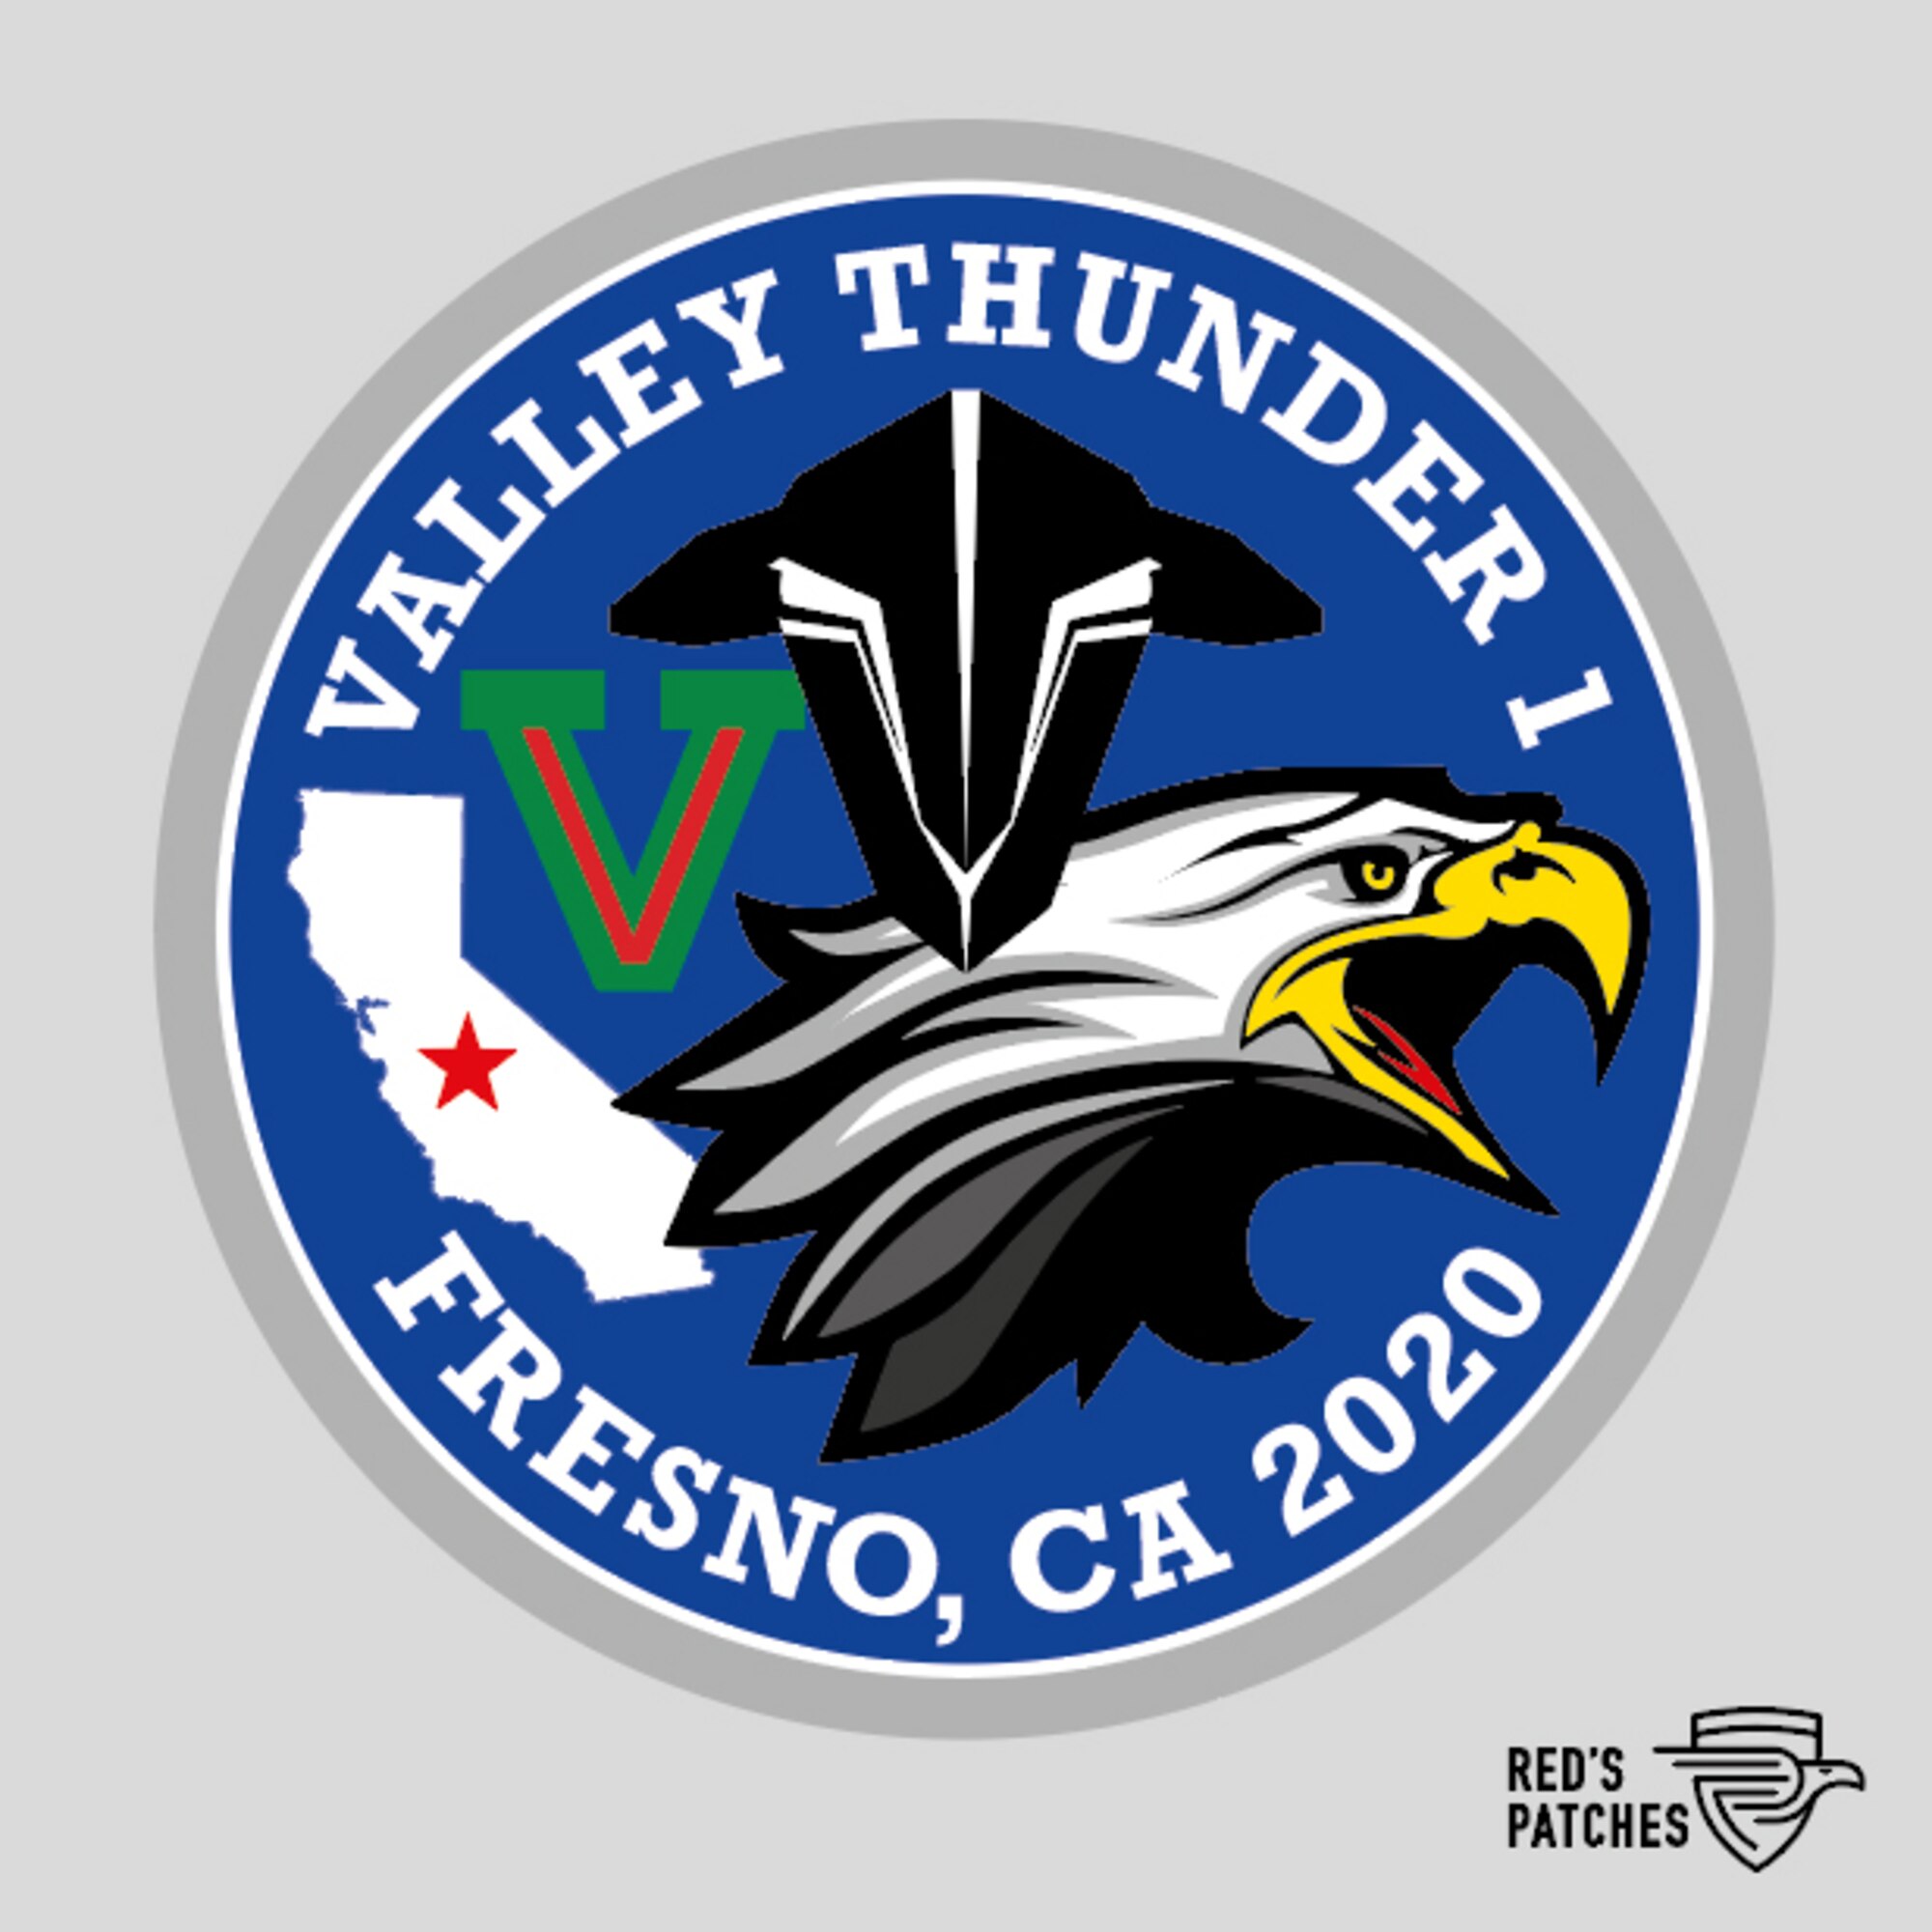 Proposed Fighter Pilot Patch for Valley Thunder training exercise.